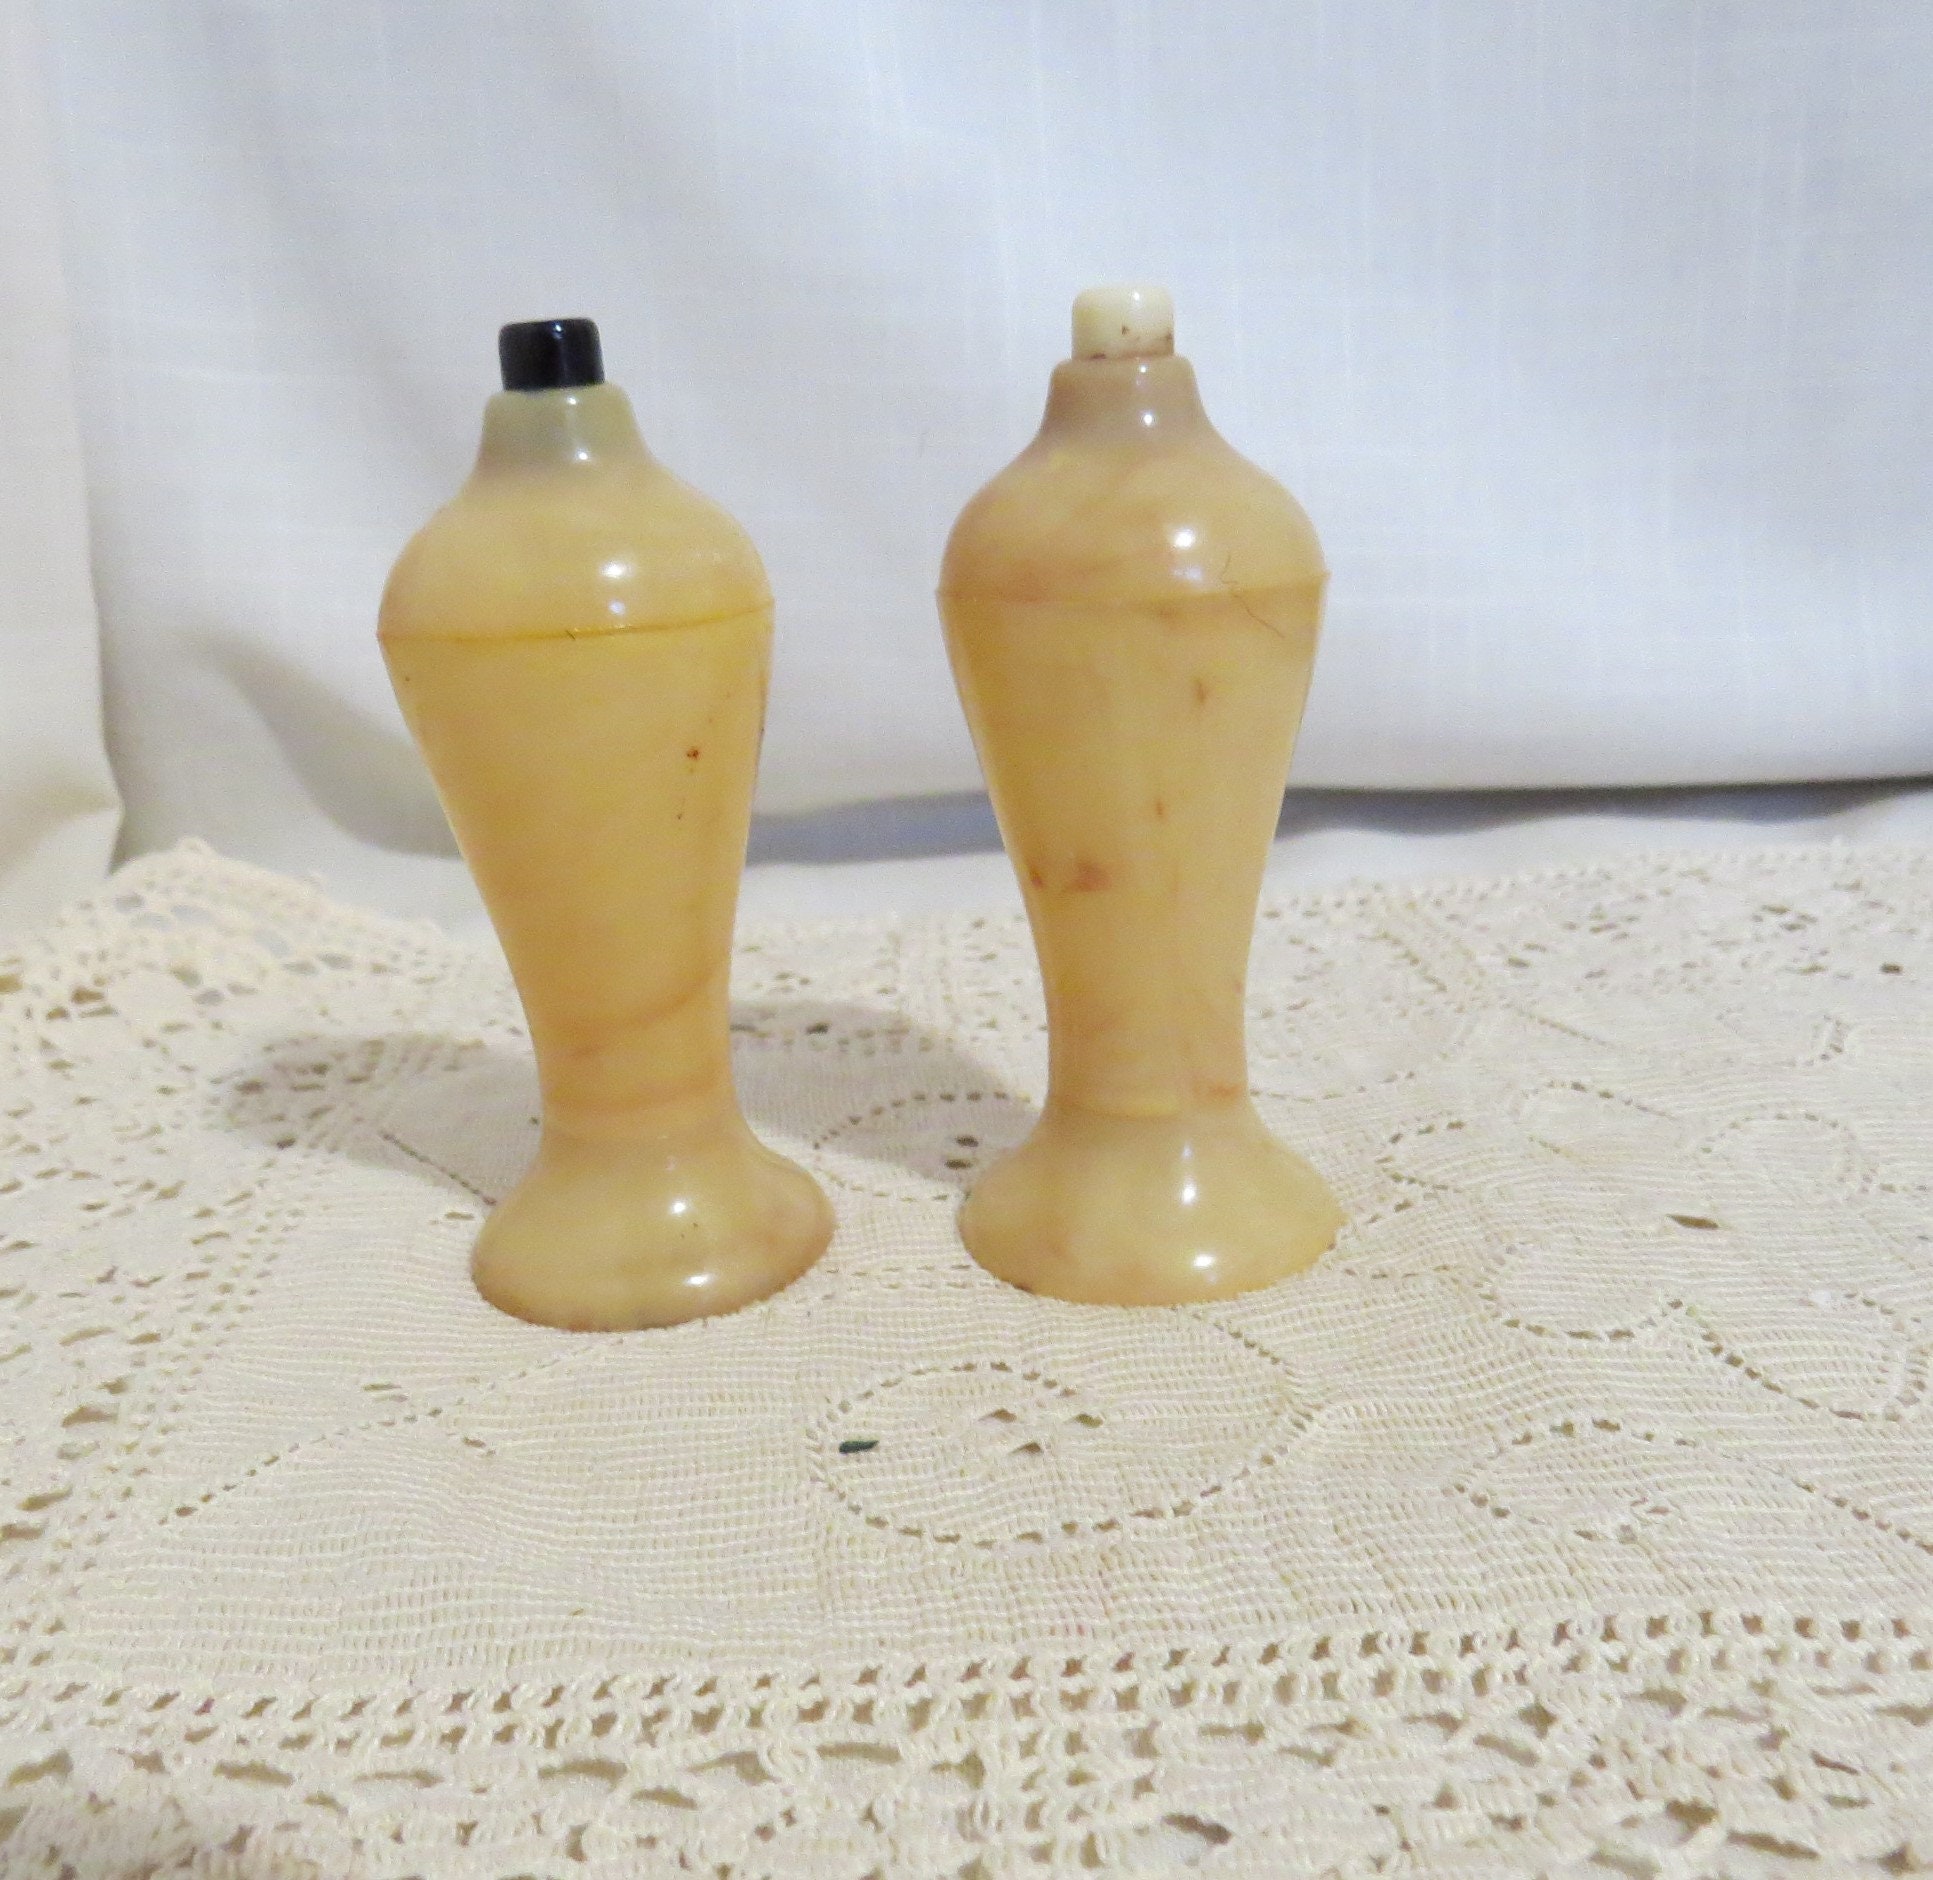 * Vintage Carvanite PINK Plastic Push Button Salt and Pepper Shakers.